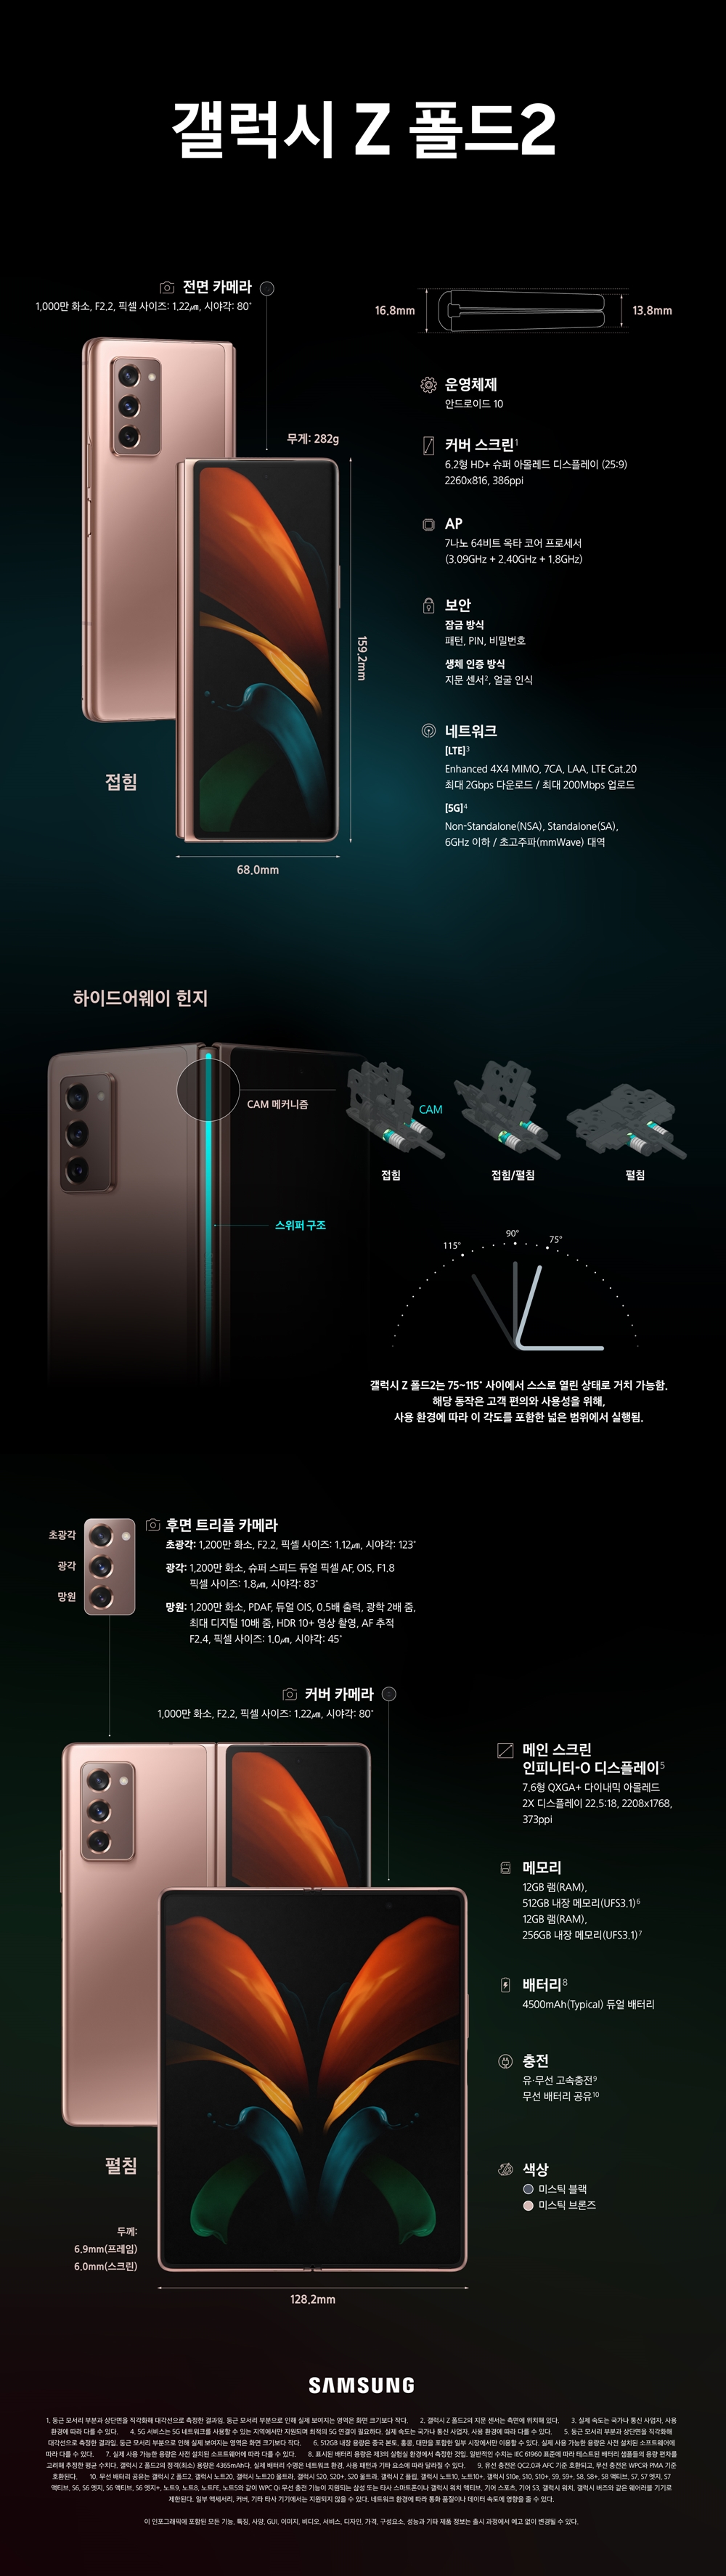 0901_Galaxy_fold2_Product_Specifications_FIN_KR_2-real-final-refvede.jpg